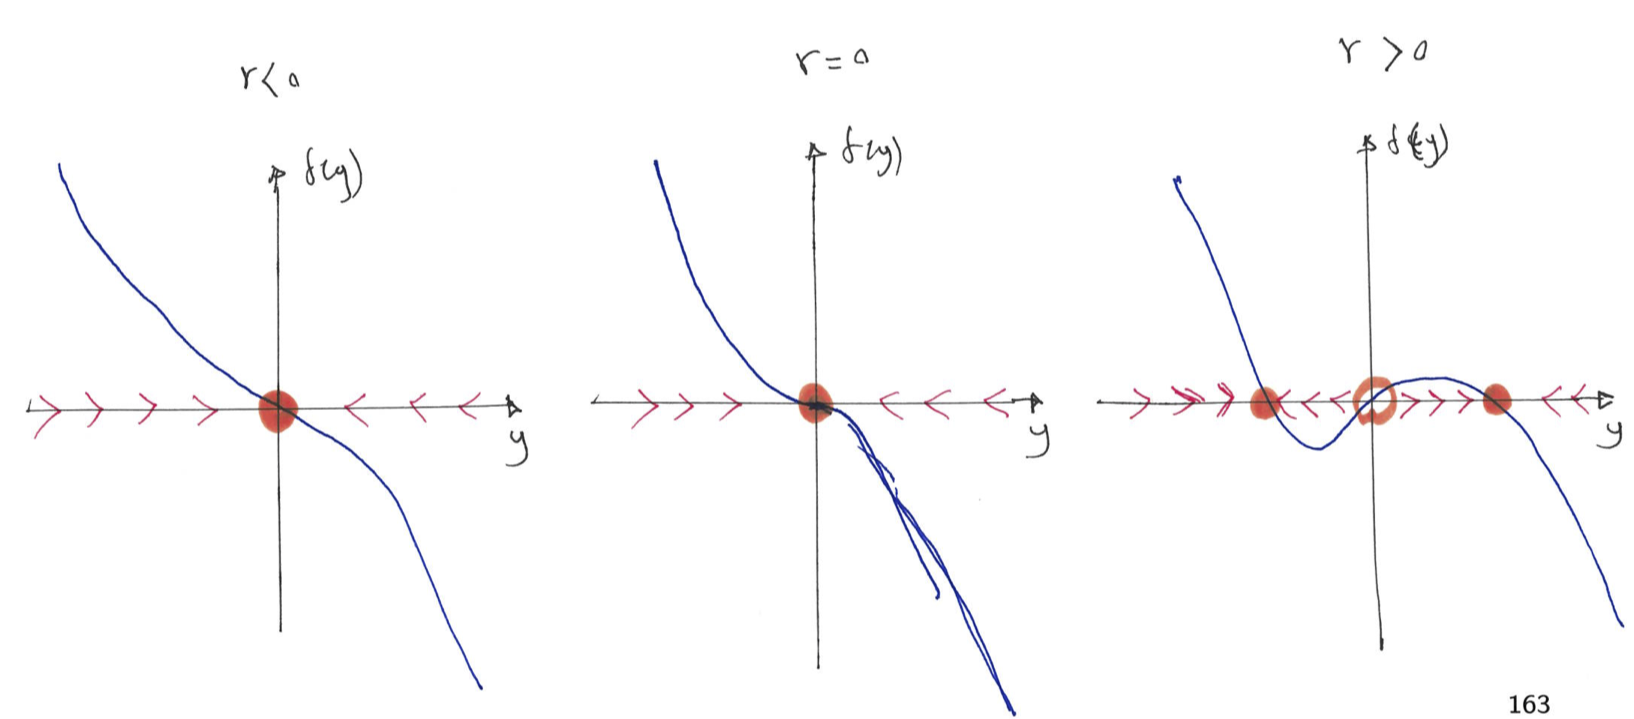 The plot of $f(y)$ vs $y$ for different values of $r$, illustrates the vector field and the stability of the fixed point for supercritical pitchforkbifurcation.